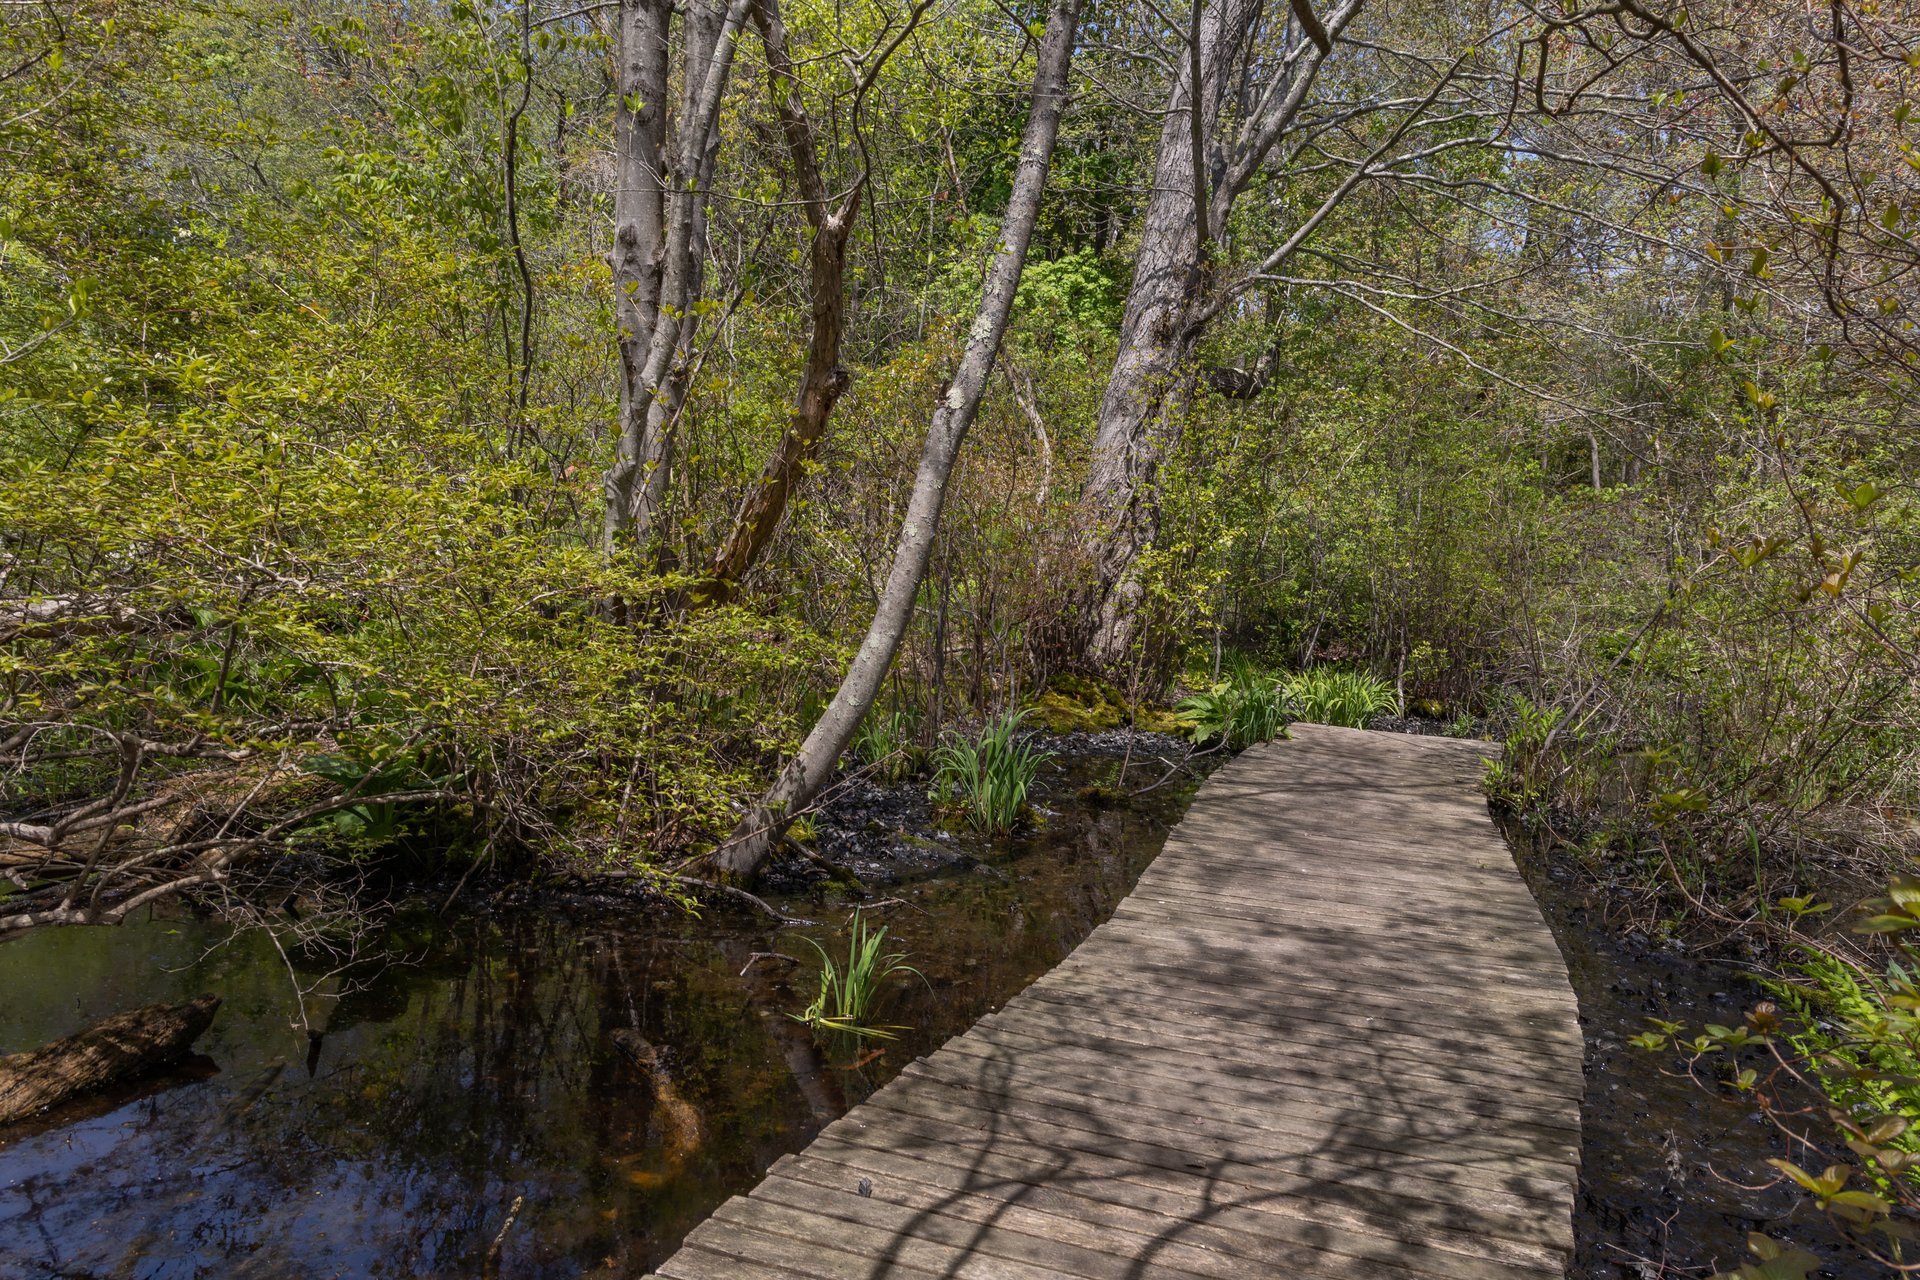 Boardwalk over water and mud leading into a dense forest and shrubby area.